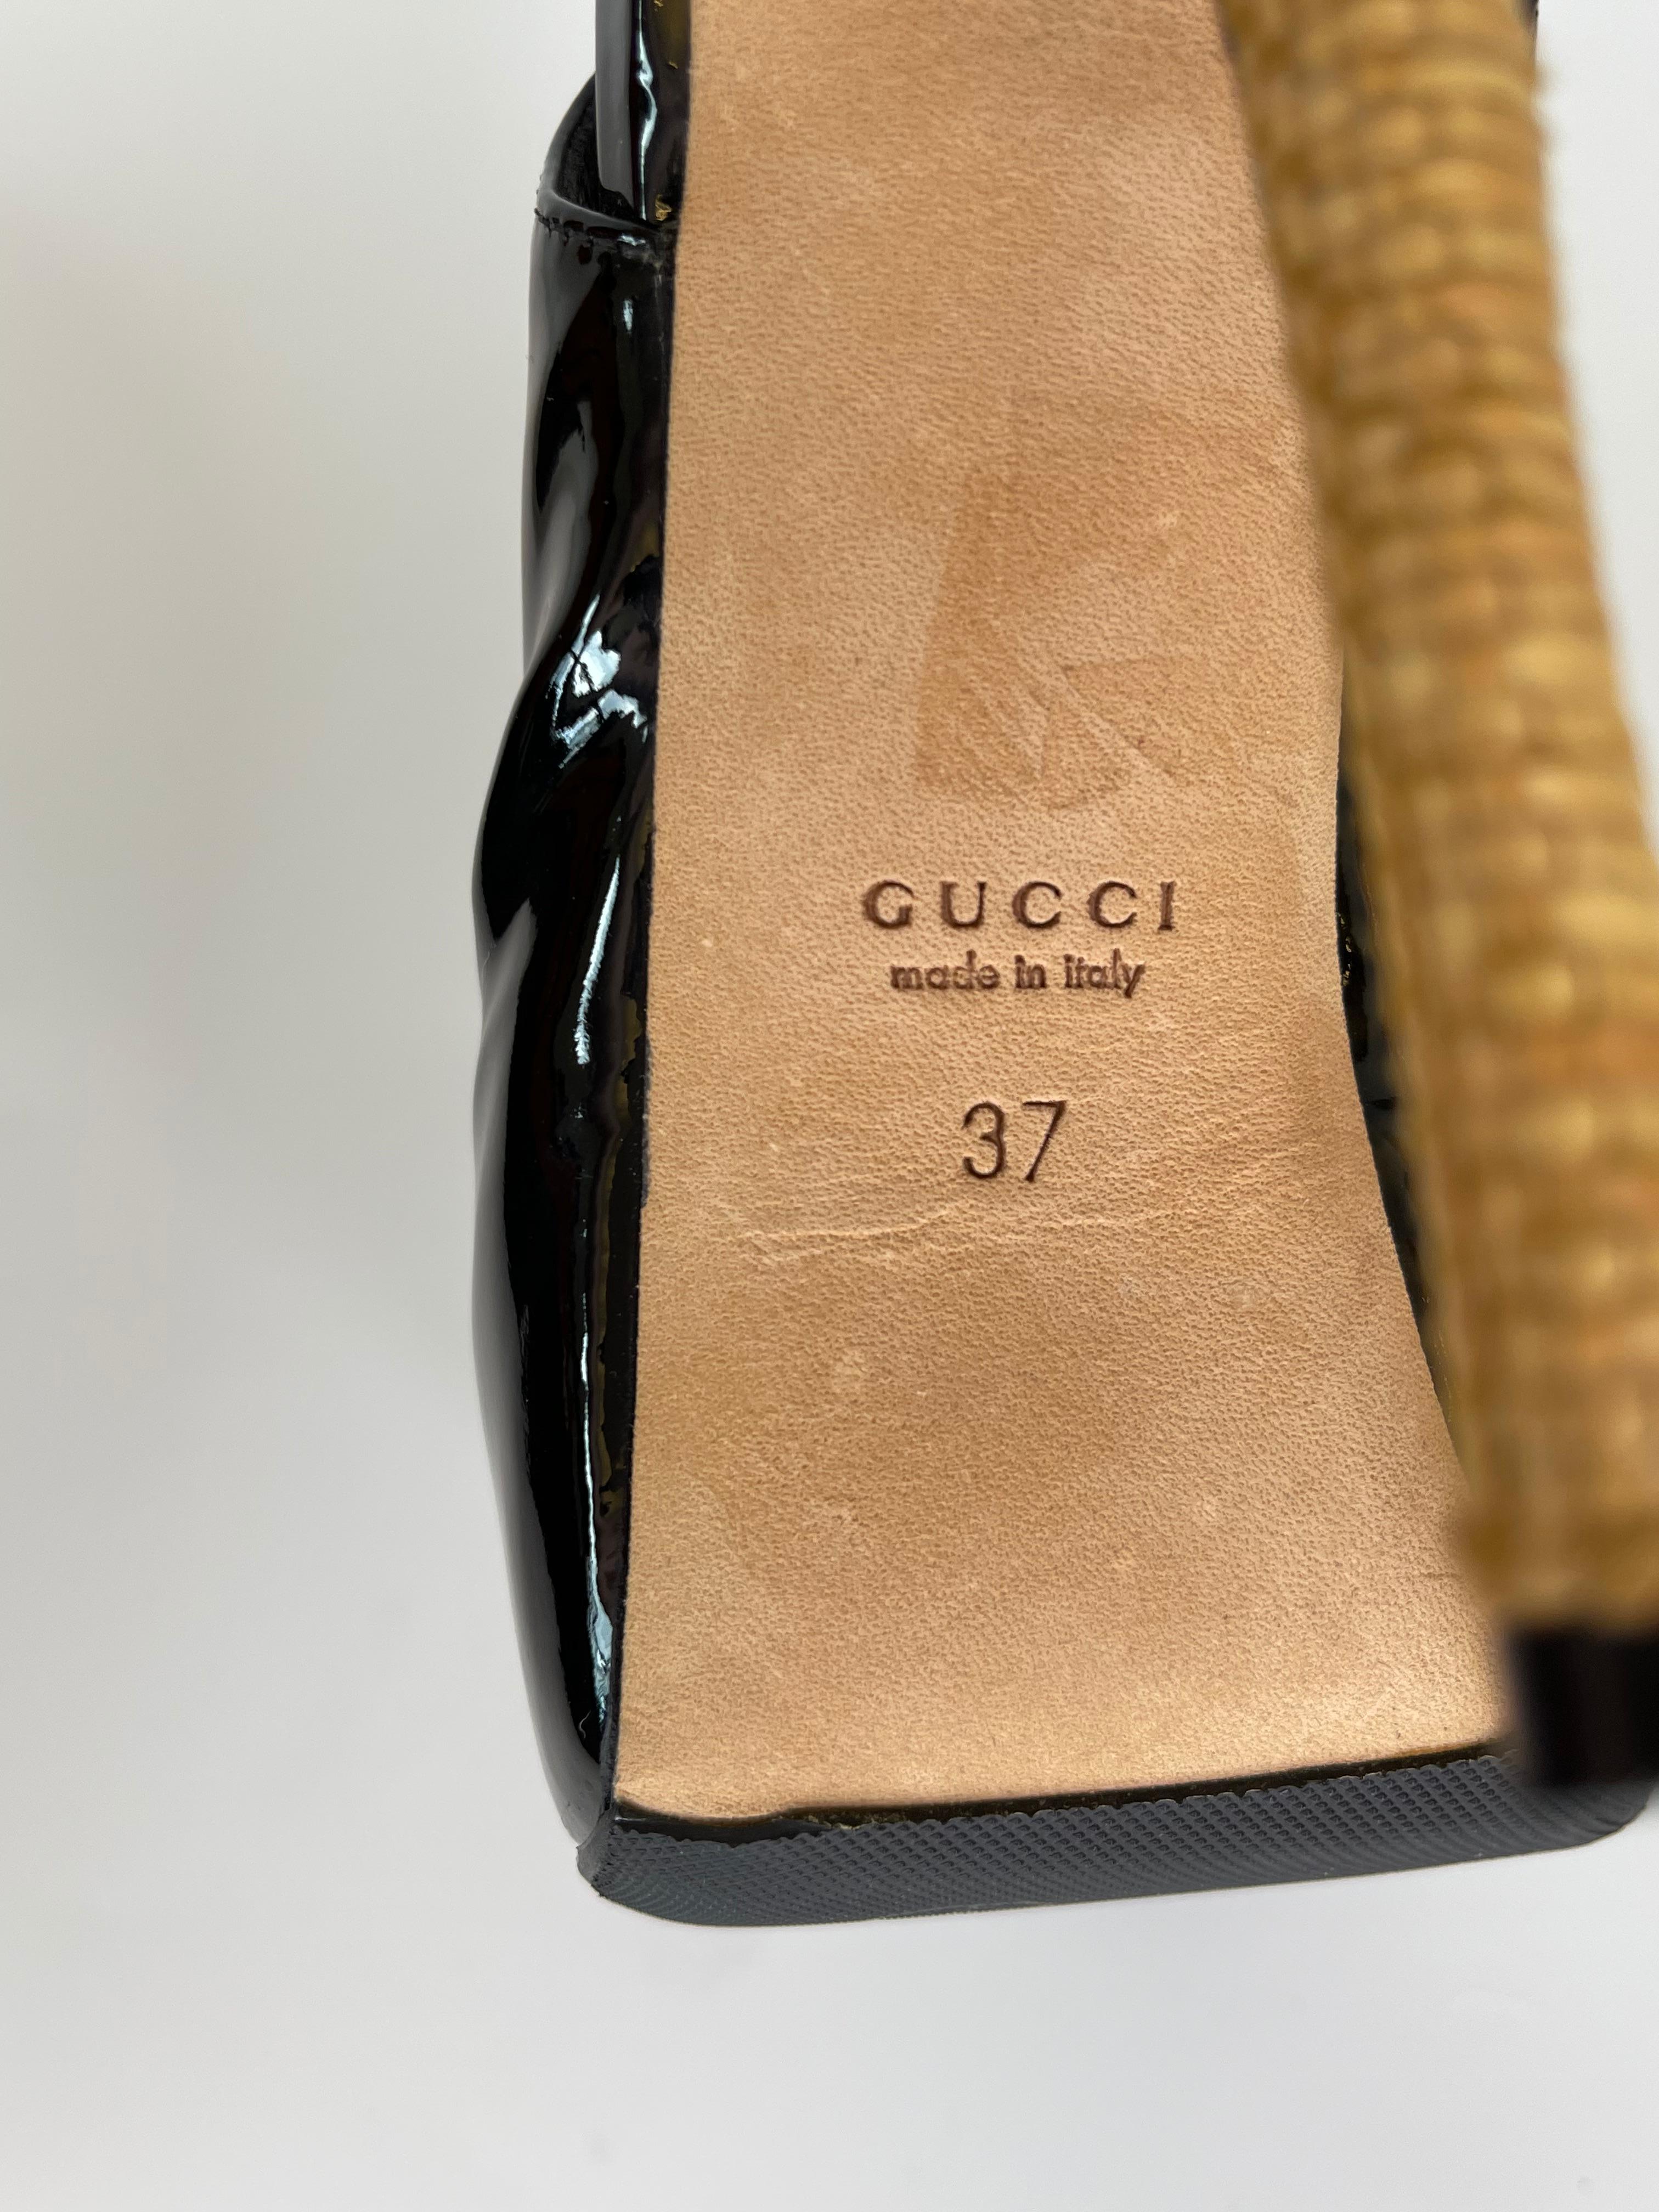 Gucci Sophia Black Patent Leather Slingbacks Peep Toe Heels (37 EU) In Good Condition In Montreal, Quebec